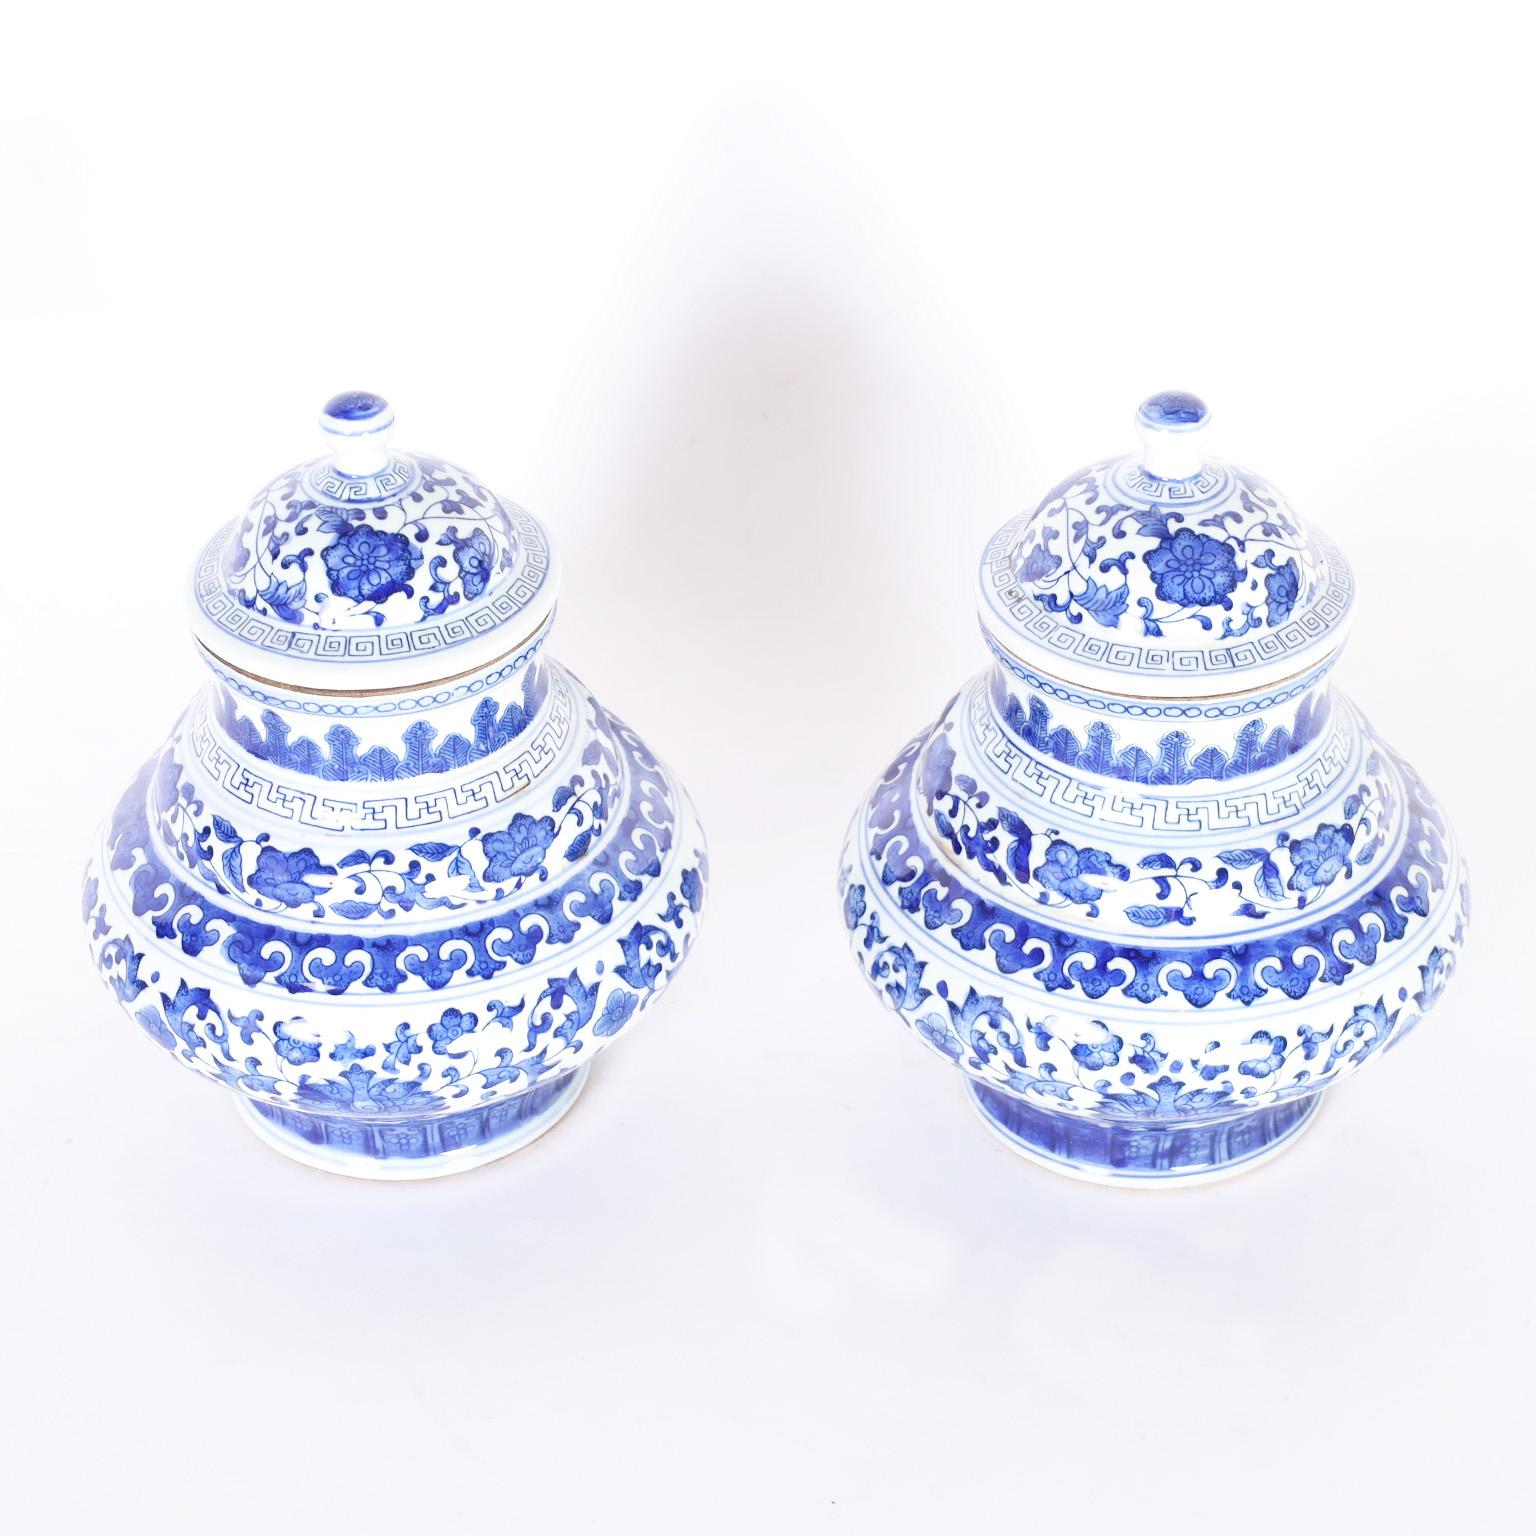 Pair of Chinese blue and white porcelain urns with a round fluid form and hand decorated with lovely floral designs.